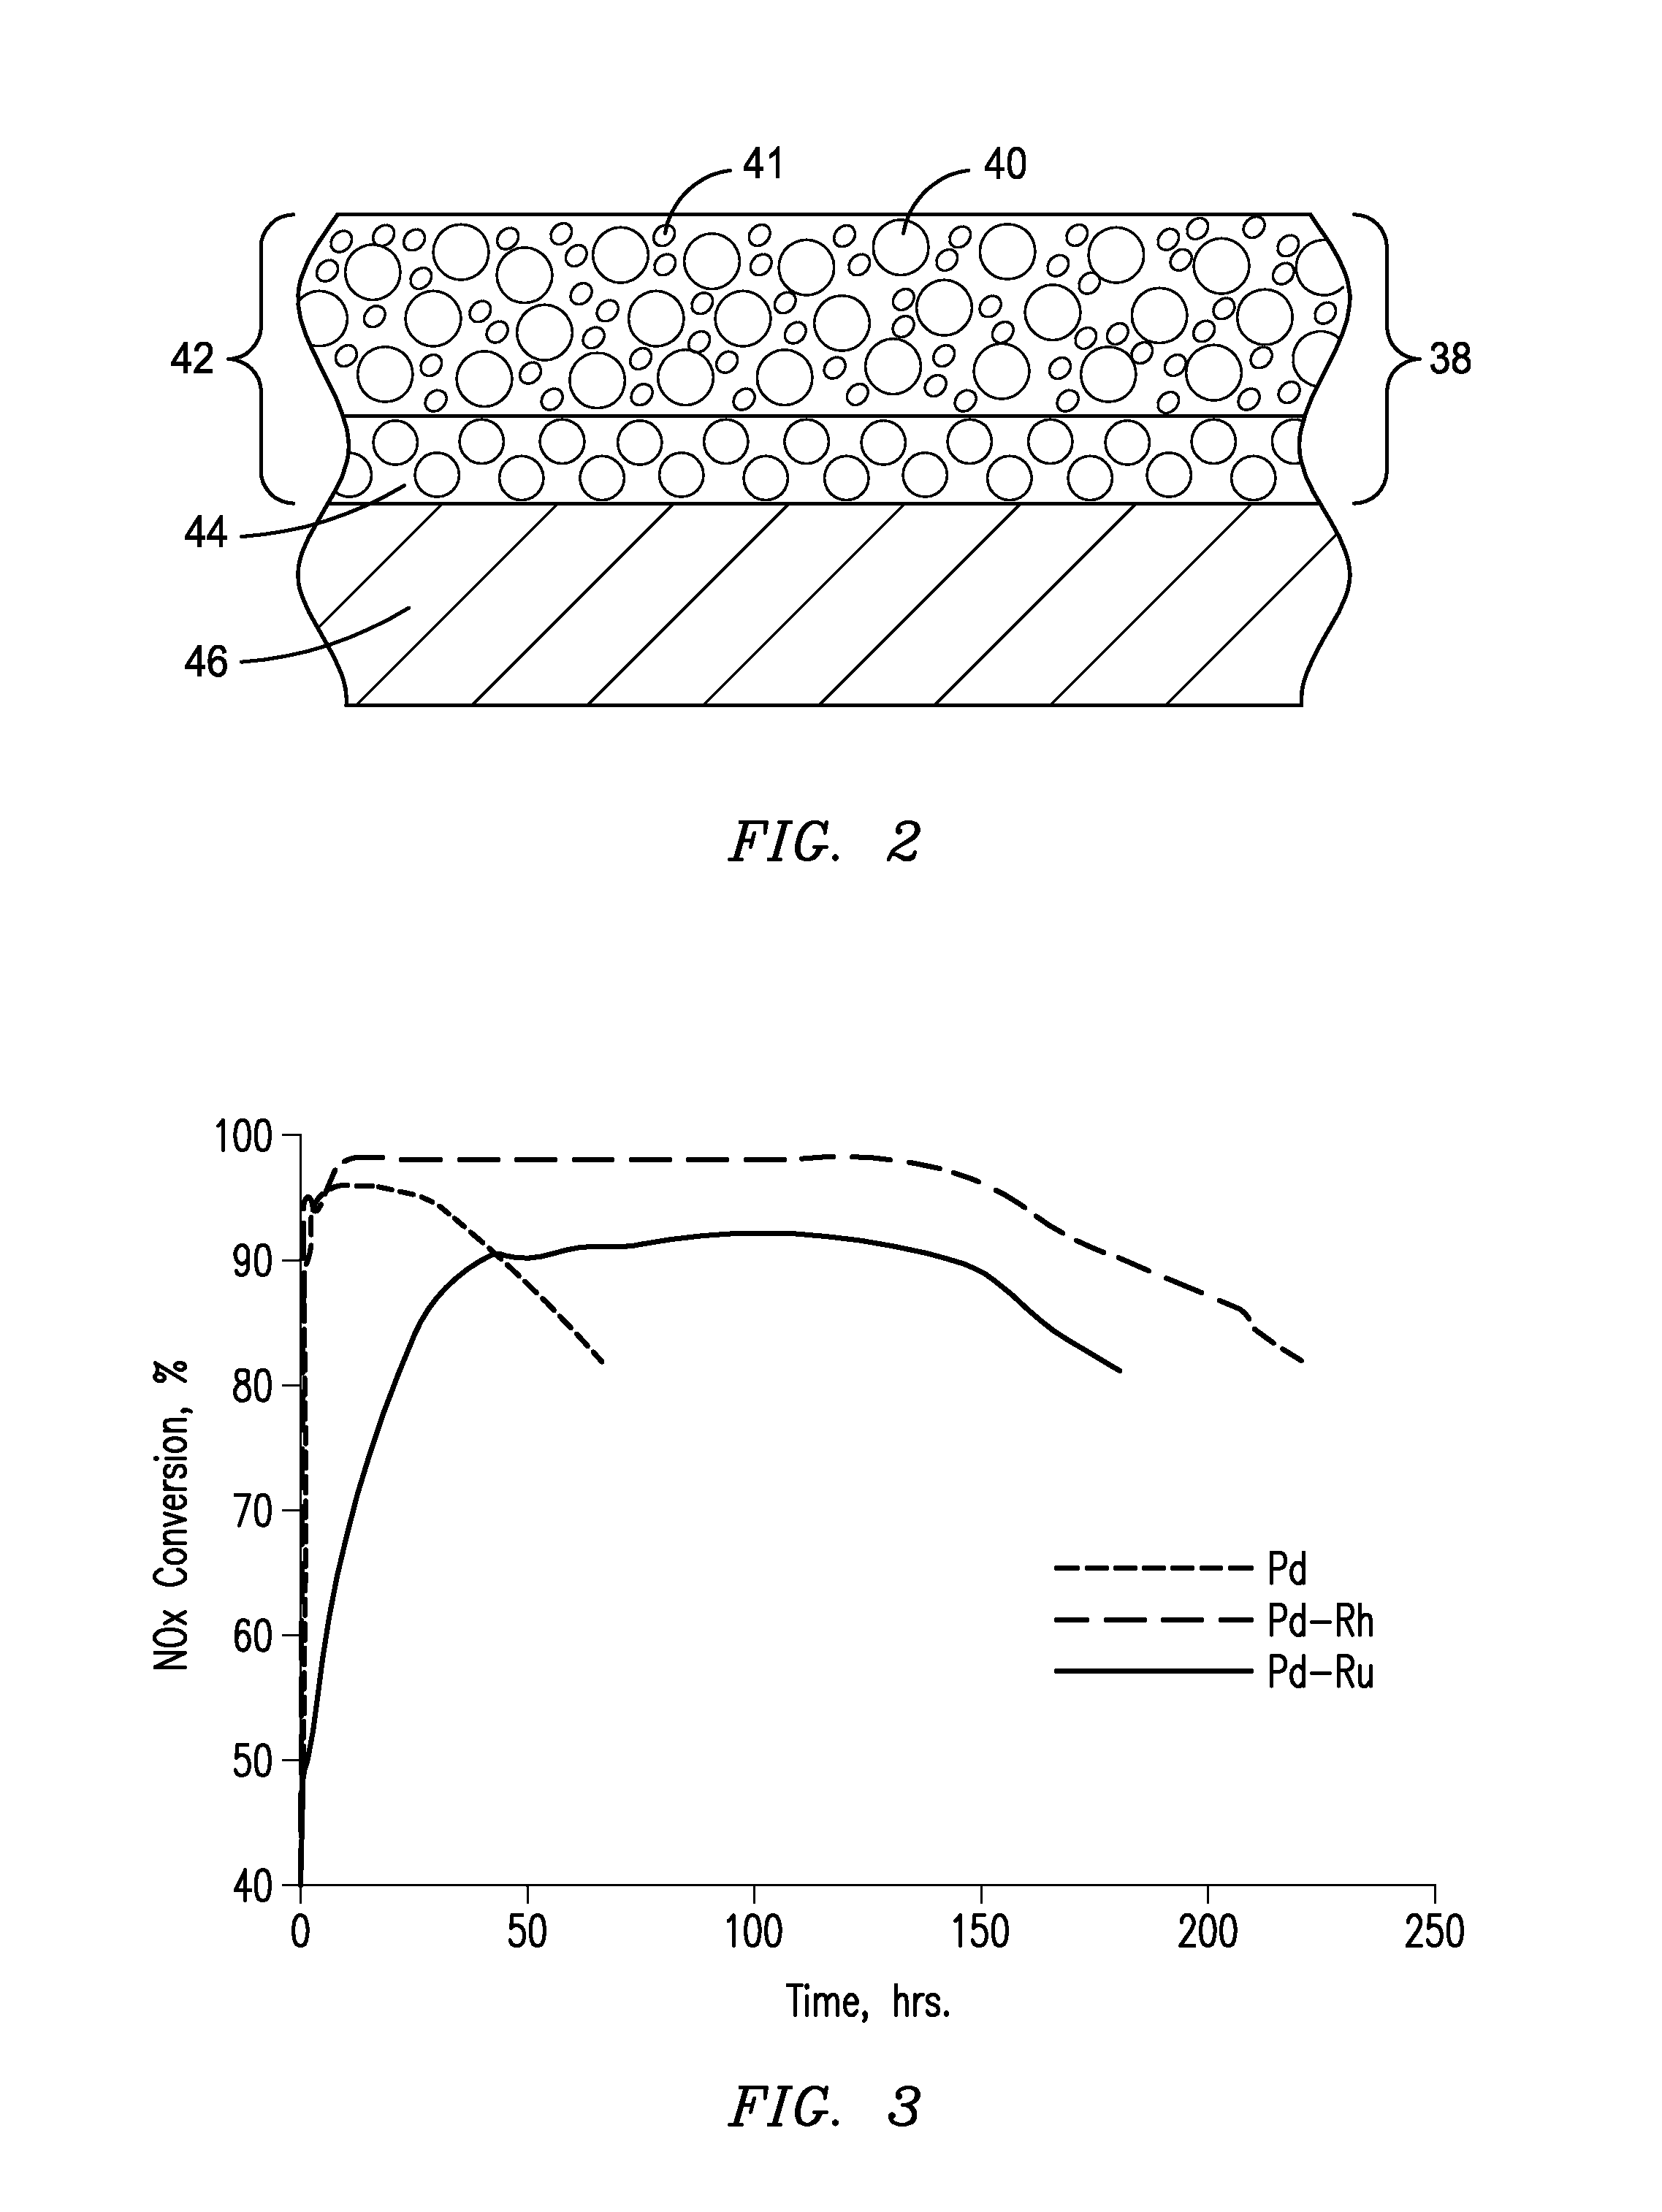 Selective Catalytic Reduction System and Process for Treating NOx Emissions Using a Palladium and Rhodium or Ruthenium Catalyst